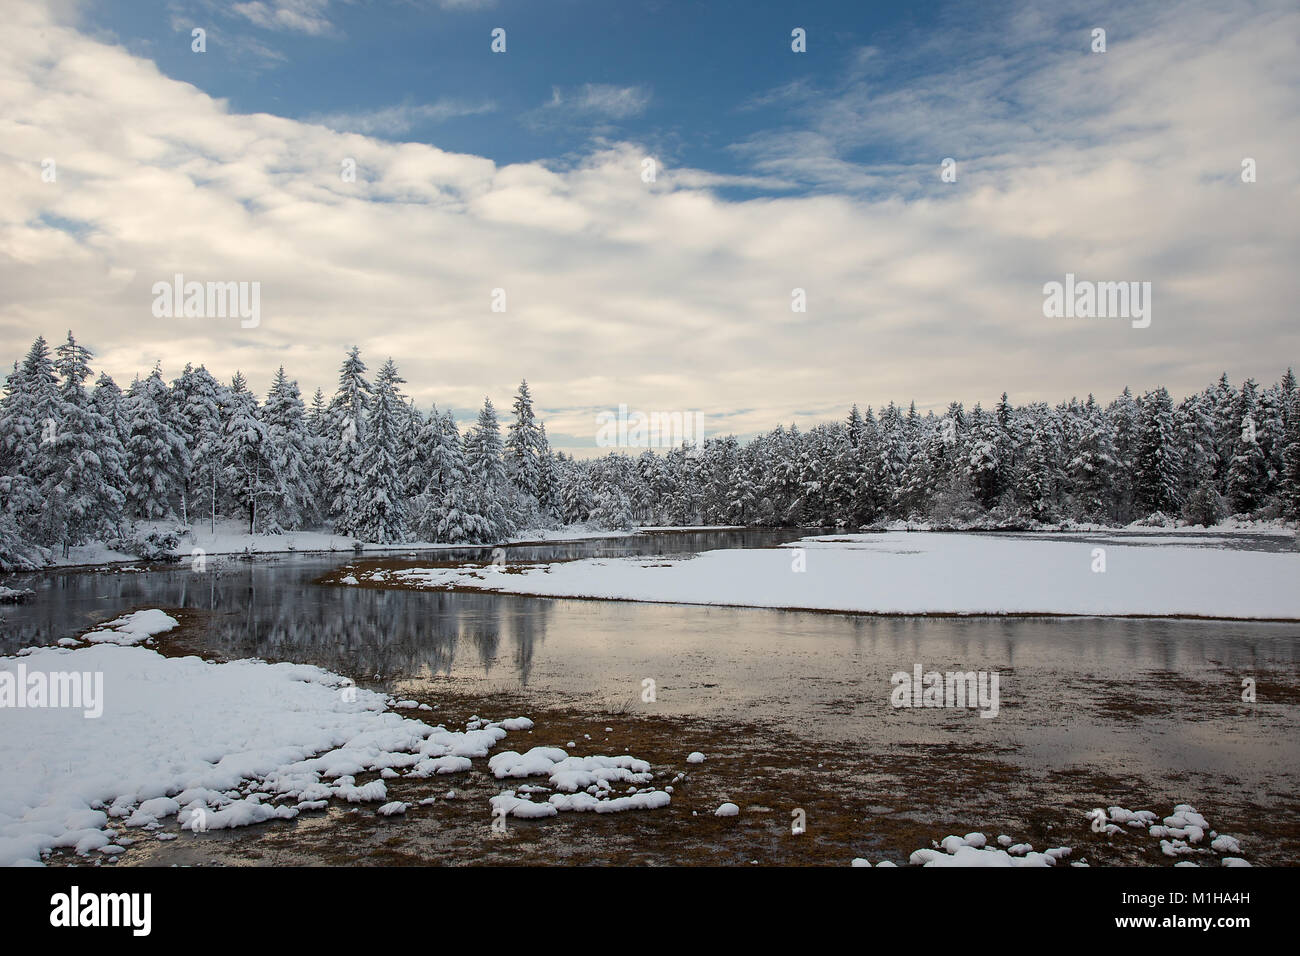 Winter landscape with flowing water, snow and snowy trees, Bloke, Slovenia Stock Photo